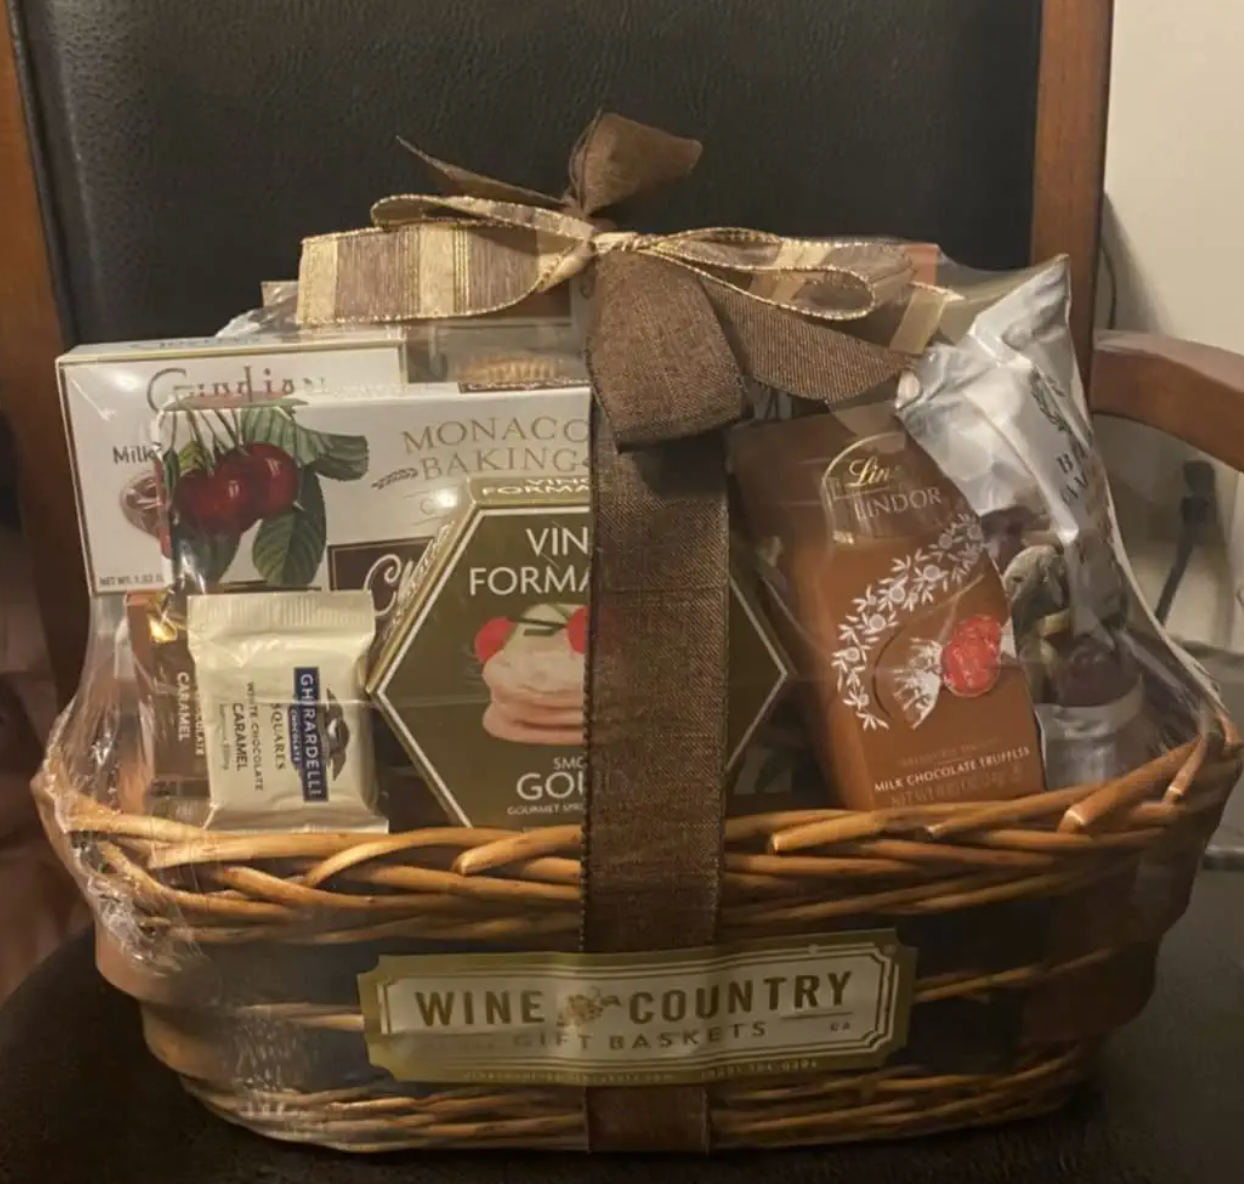 Unique Gift Boxes NZ - Snack and Beverage Gift Baskets| Spirited Gifts